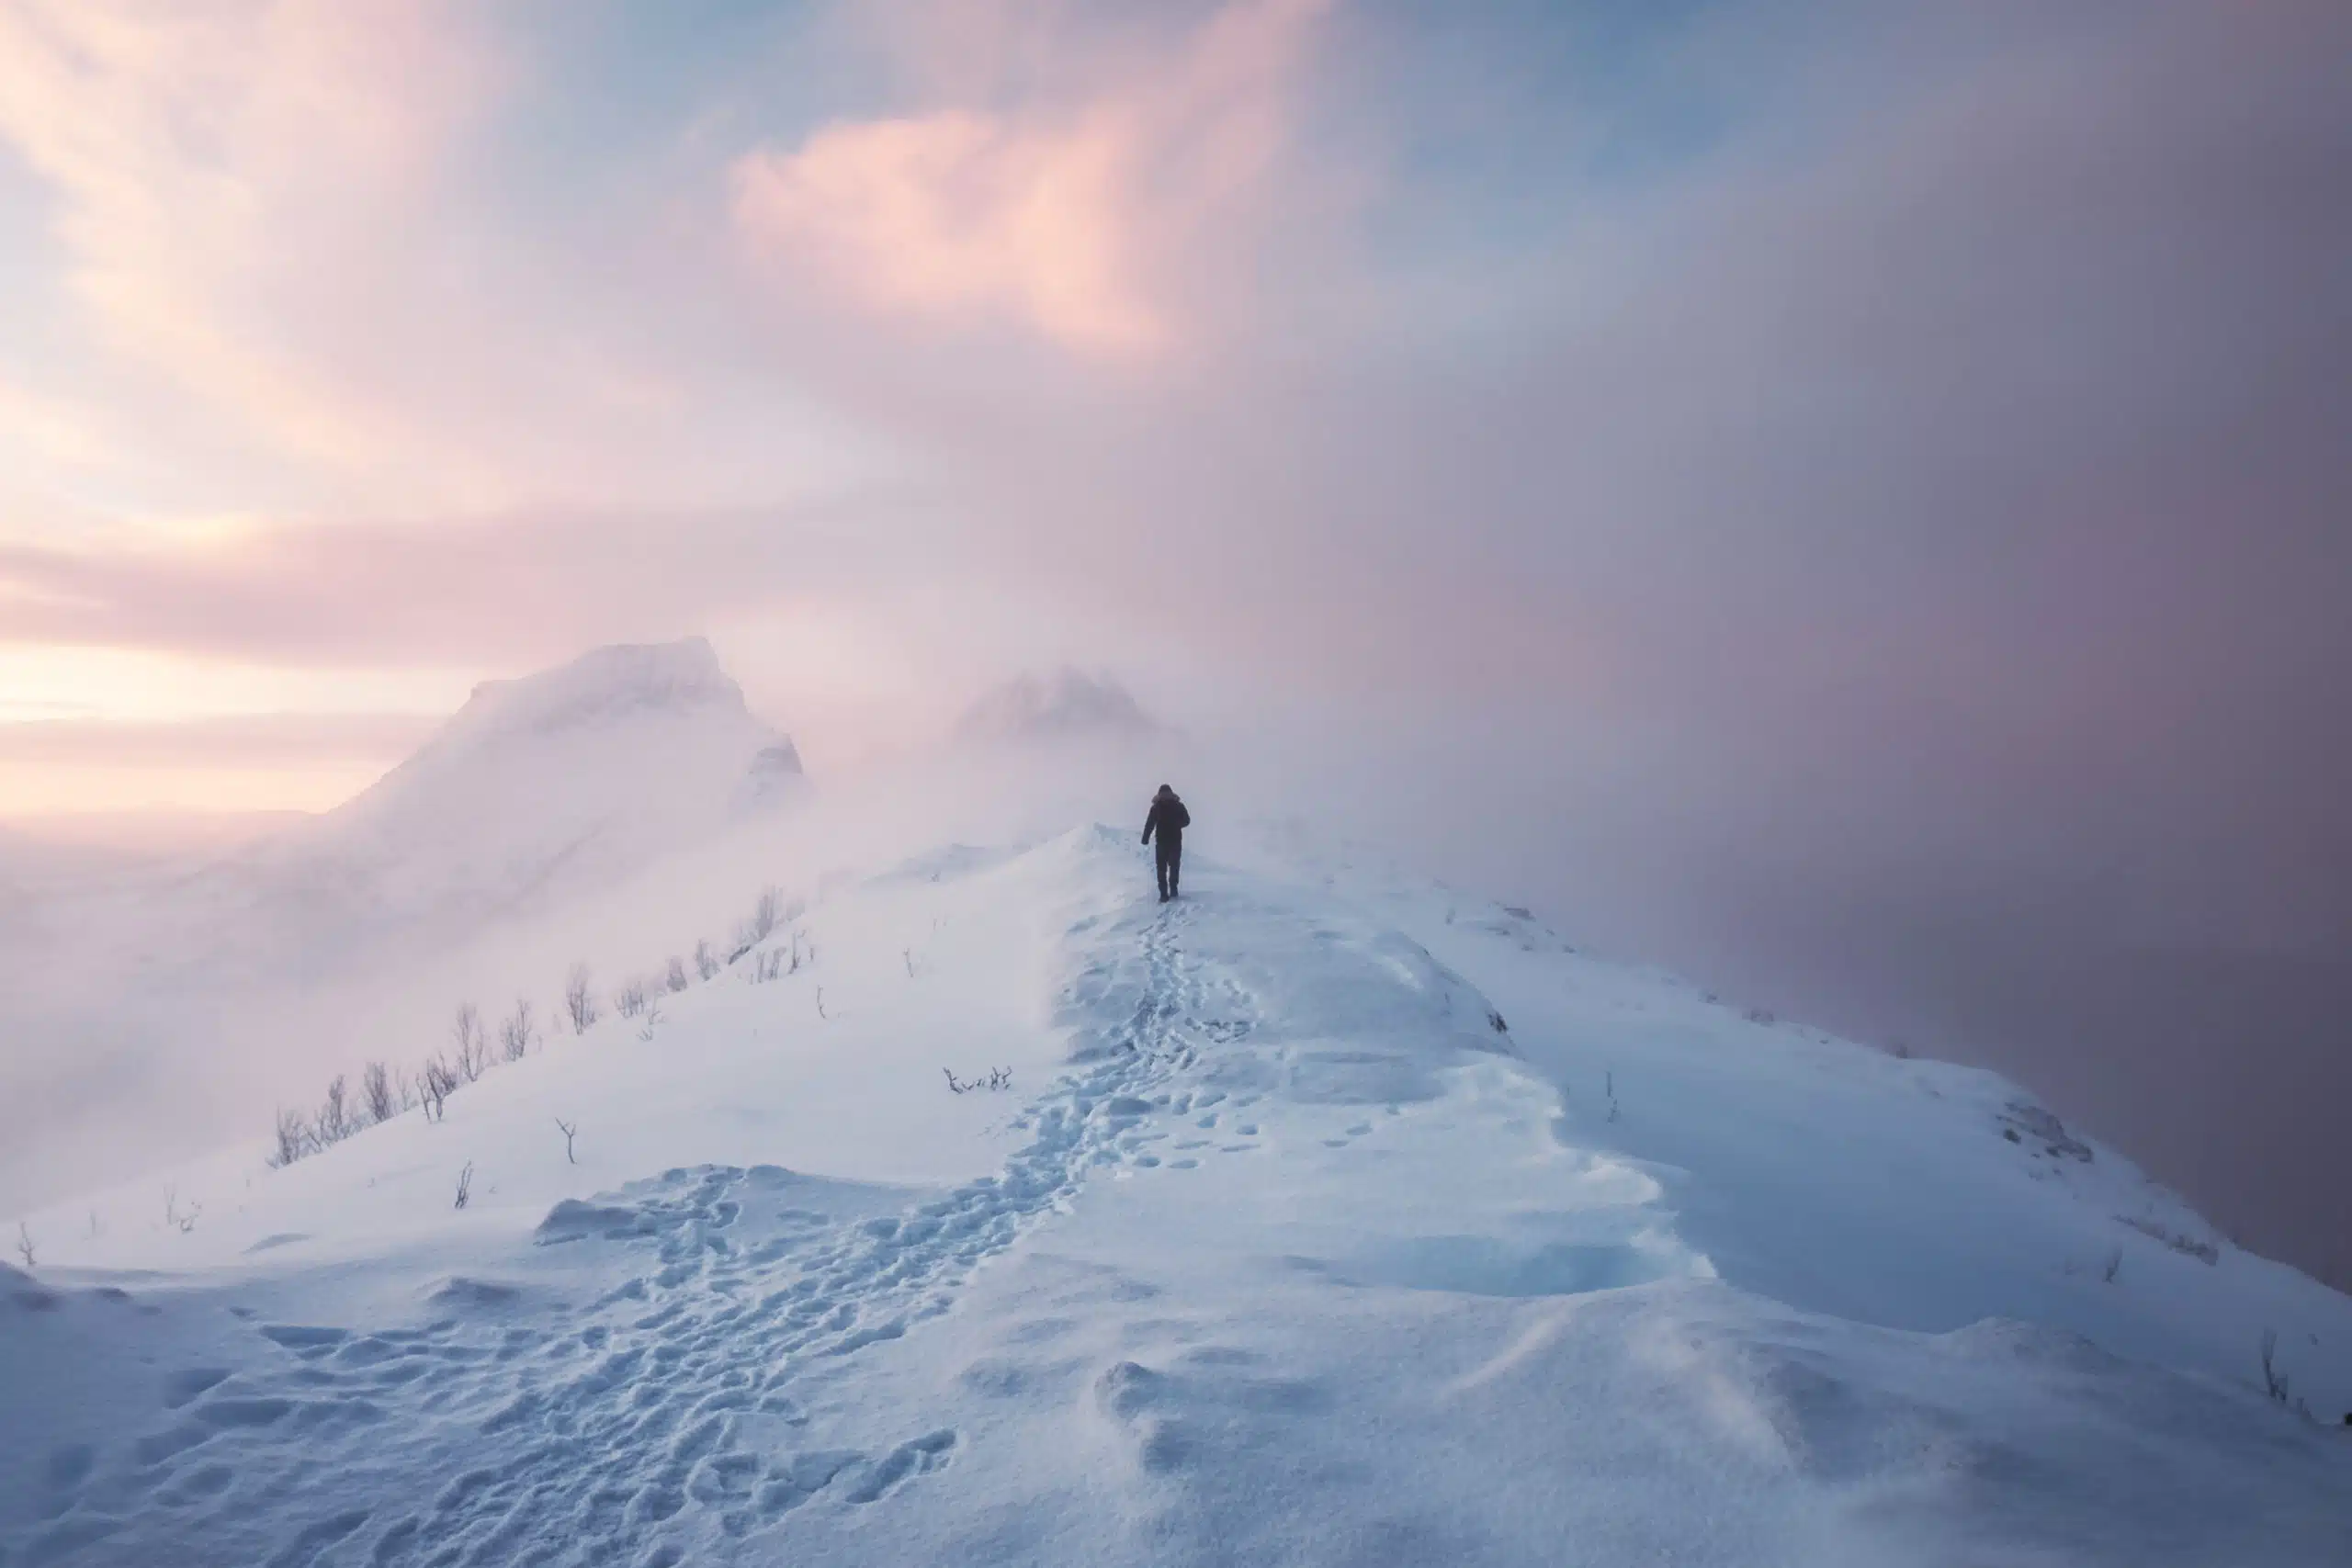 Man mountaineer walking alone with footprint on snowy mountain.